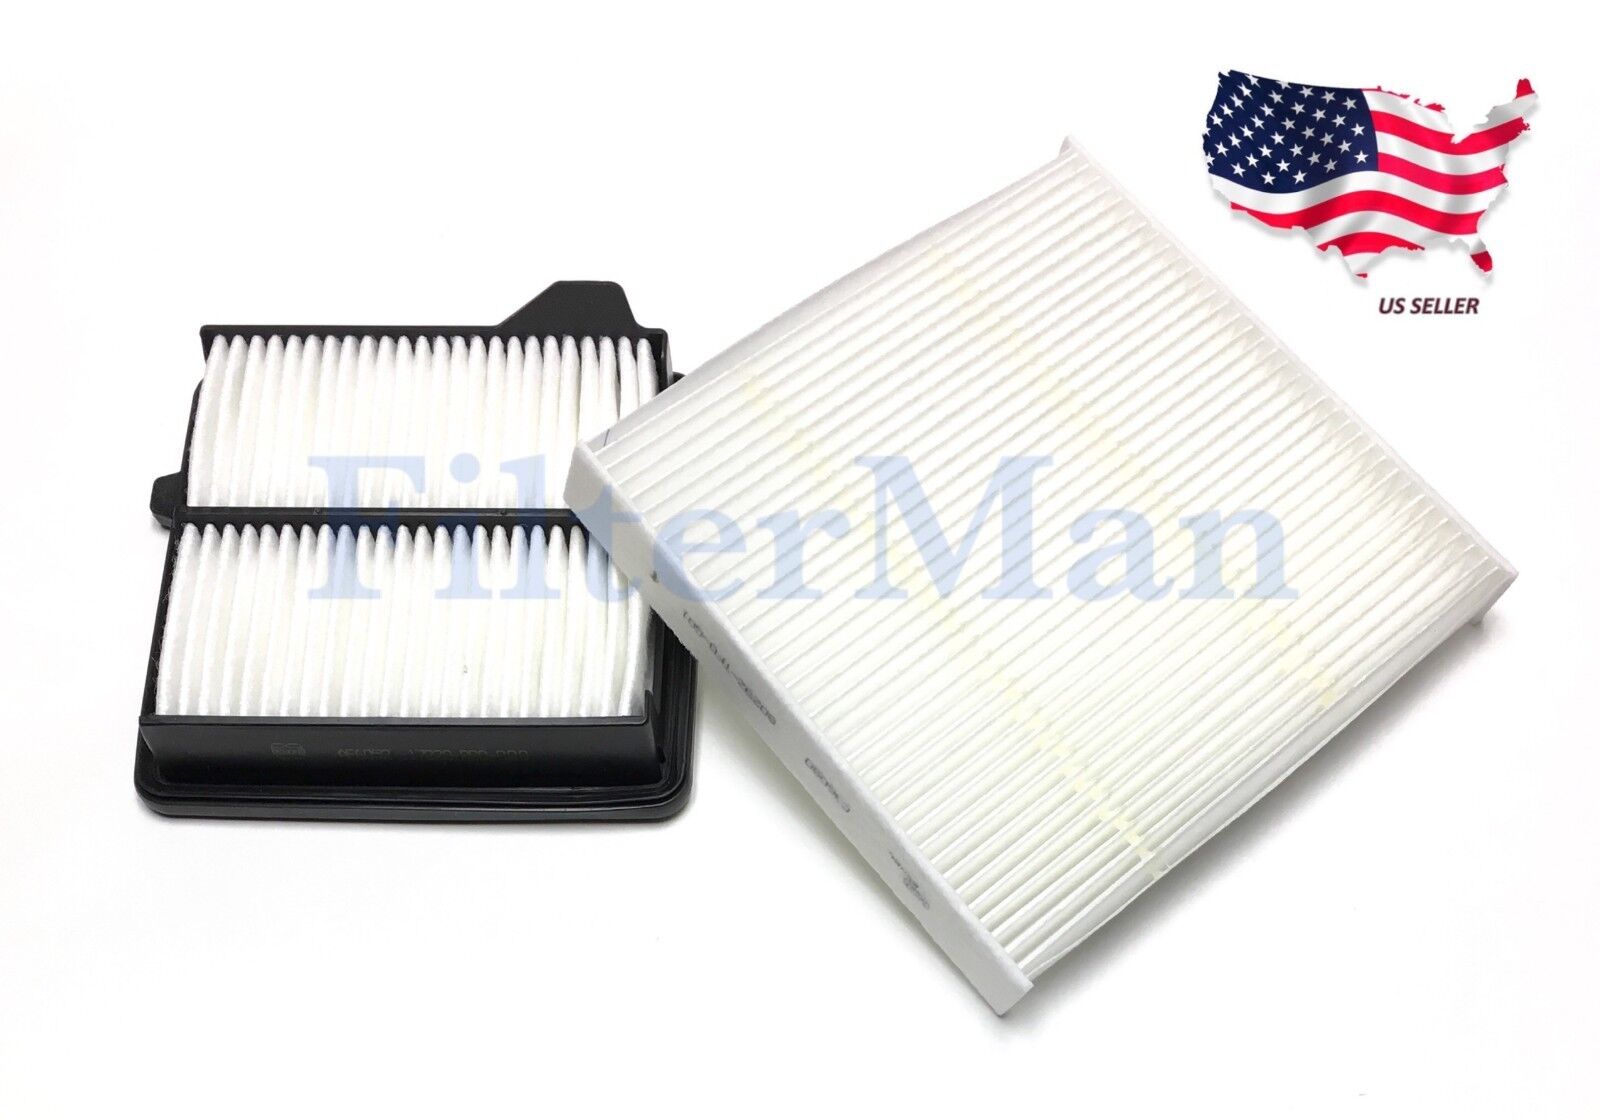 Engine & Cabin Air filter For HONDA FIT 09-14 High Quality Fast Shipping @_@